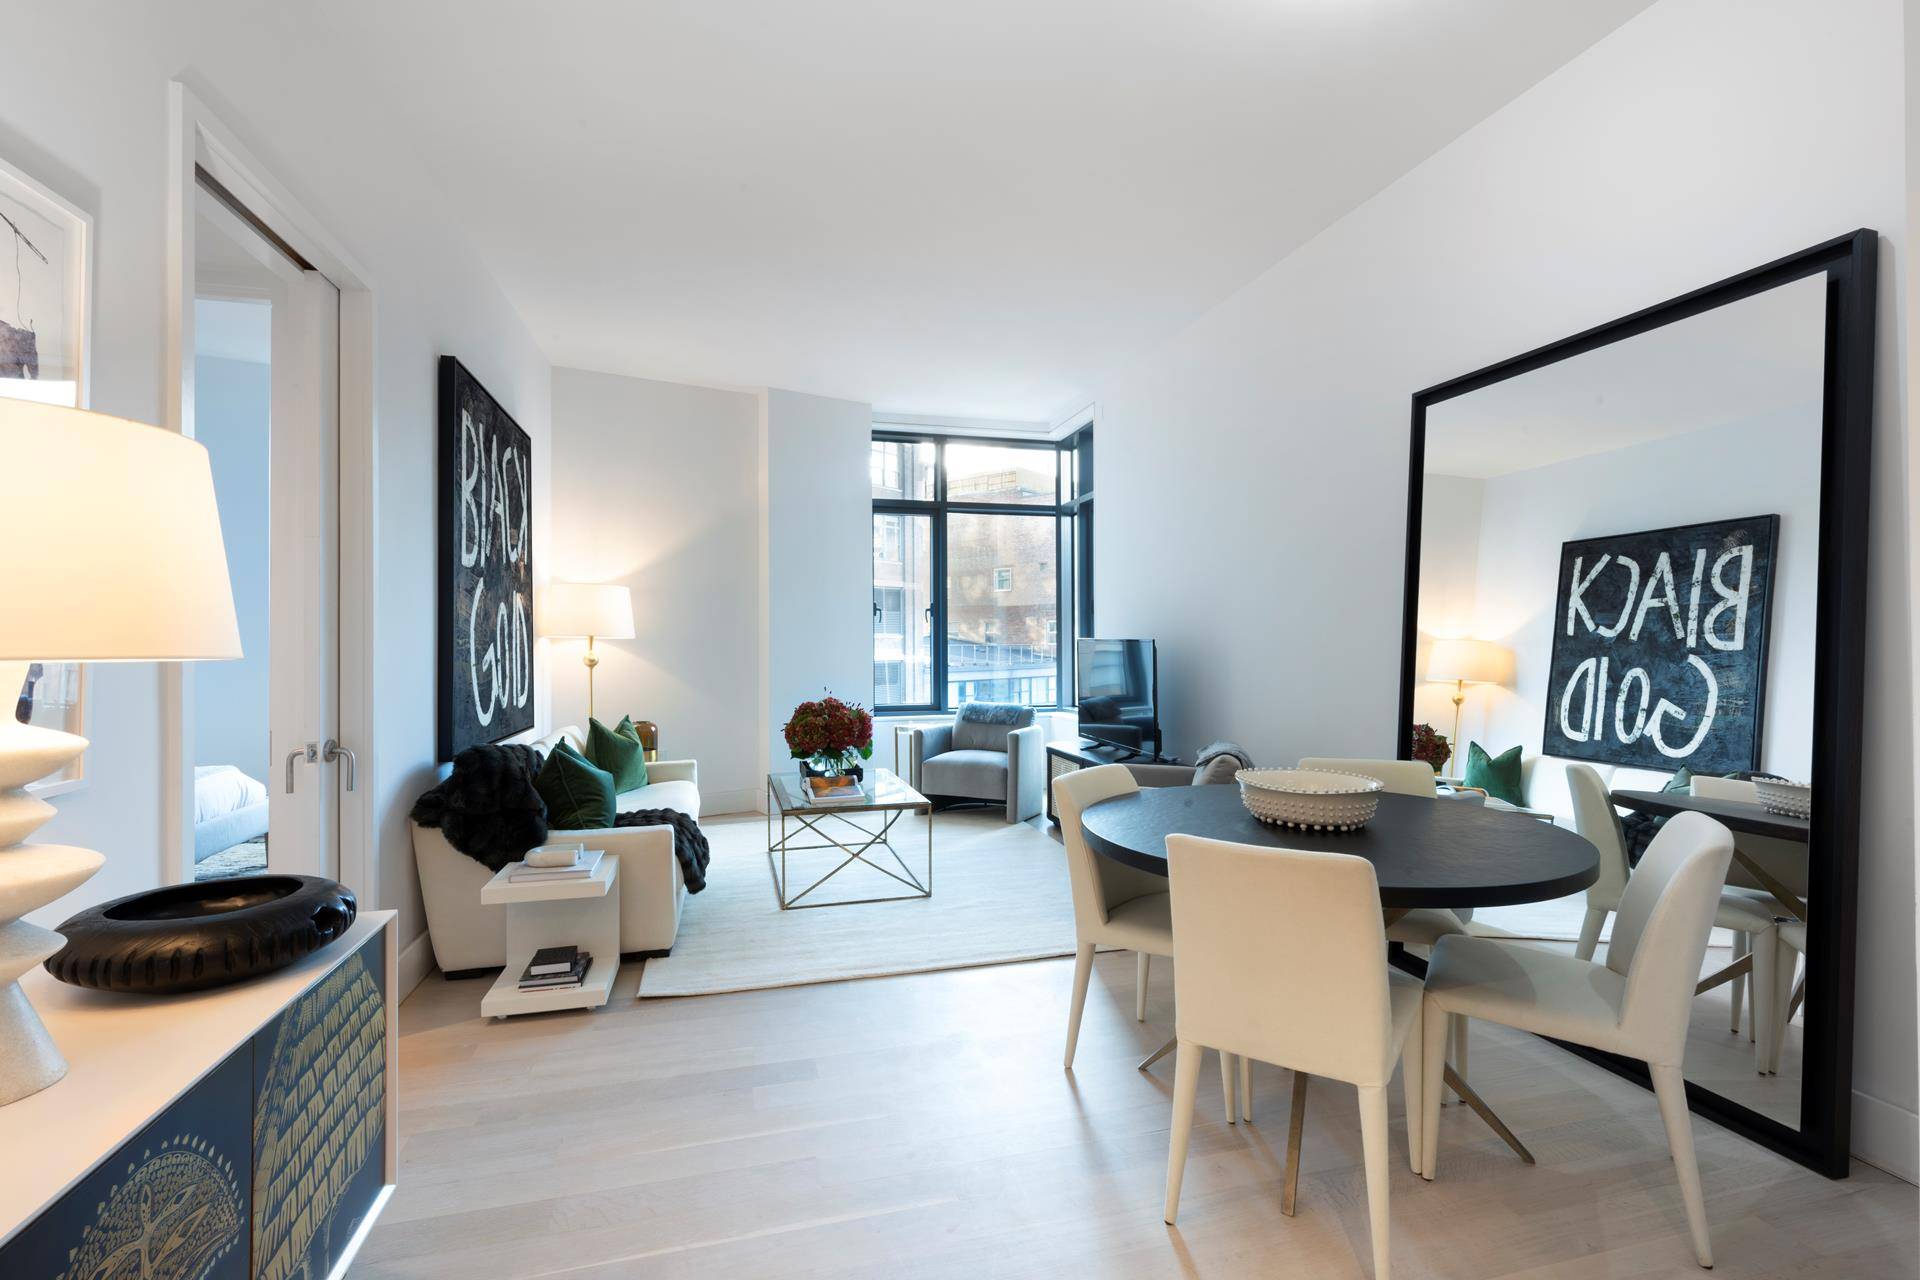 Introducing residence 7C at The Riverview, a new boutique residential condominium with architecture and interiors by award winning Rawlings Architects, located at the crossroads of TriBeCa, the West Village, and ...